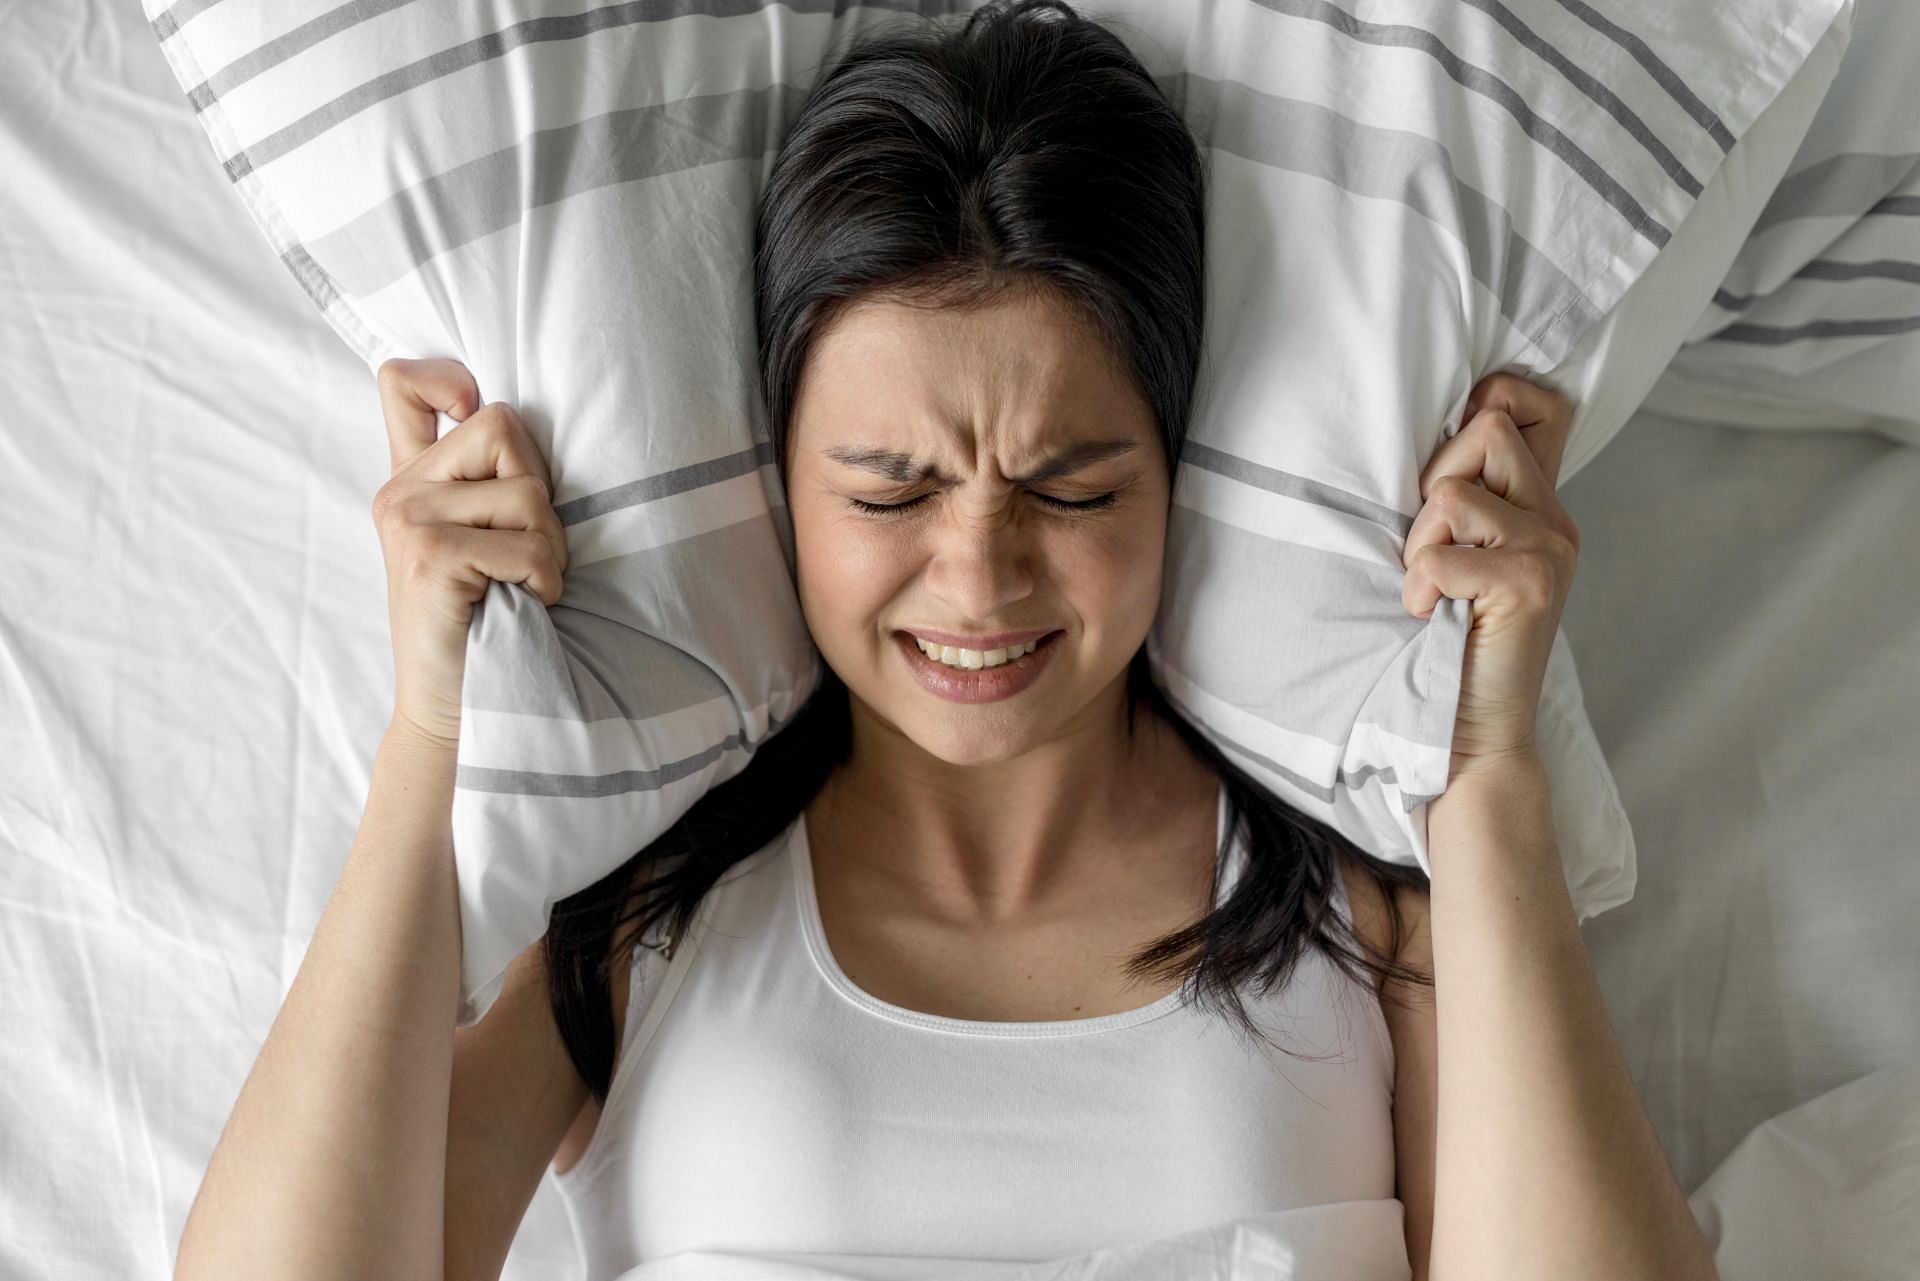 Sleep problems have now been shown to be linked to stroke, which tips would you like to implement? (Image via Freepik/ Freepik)